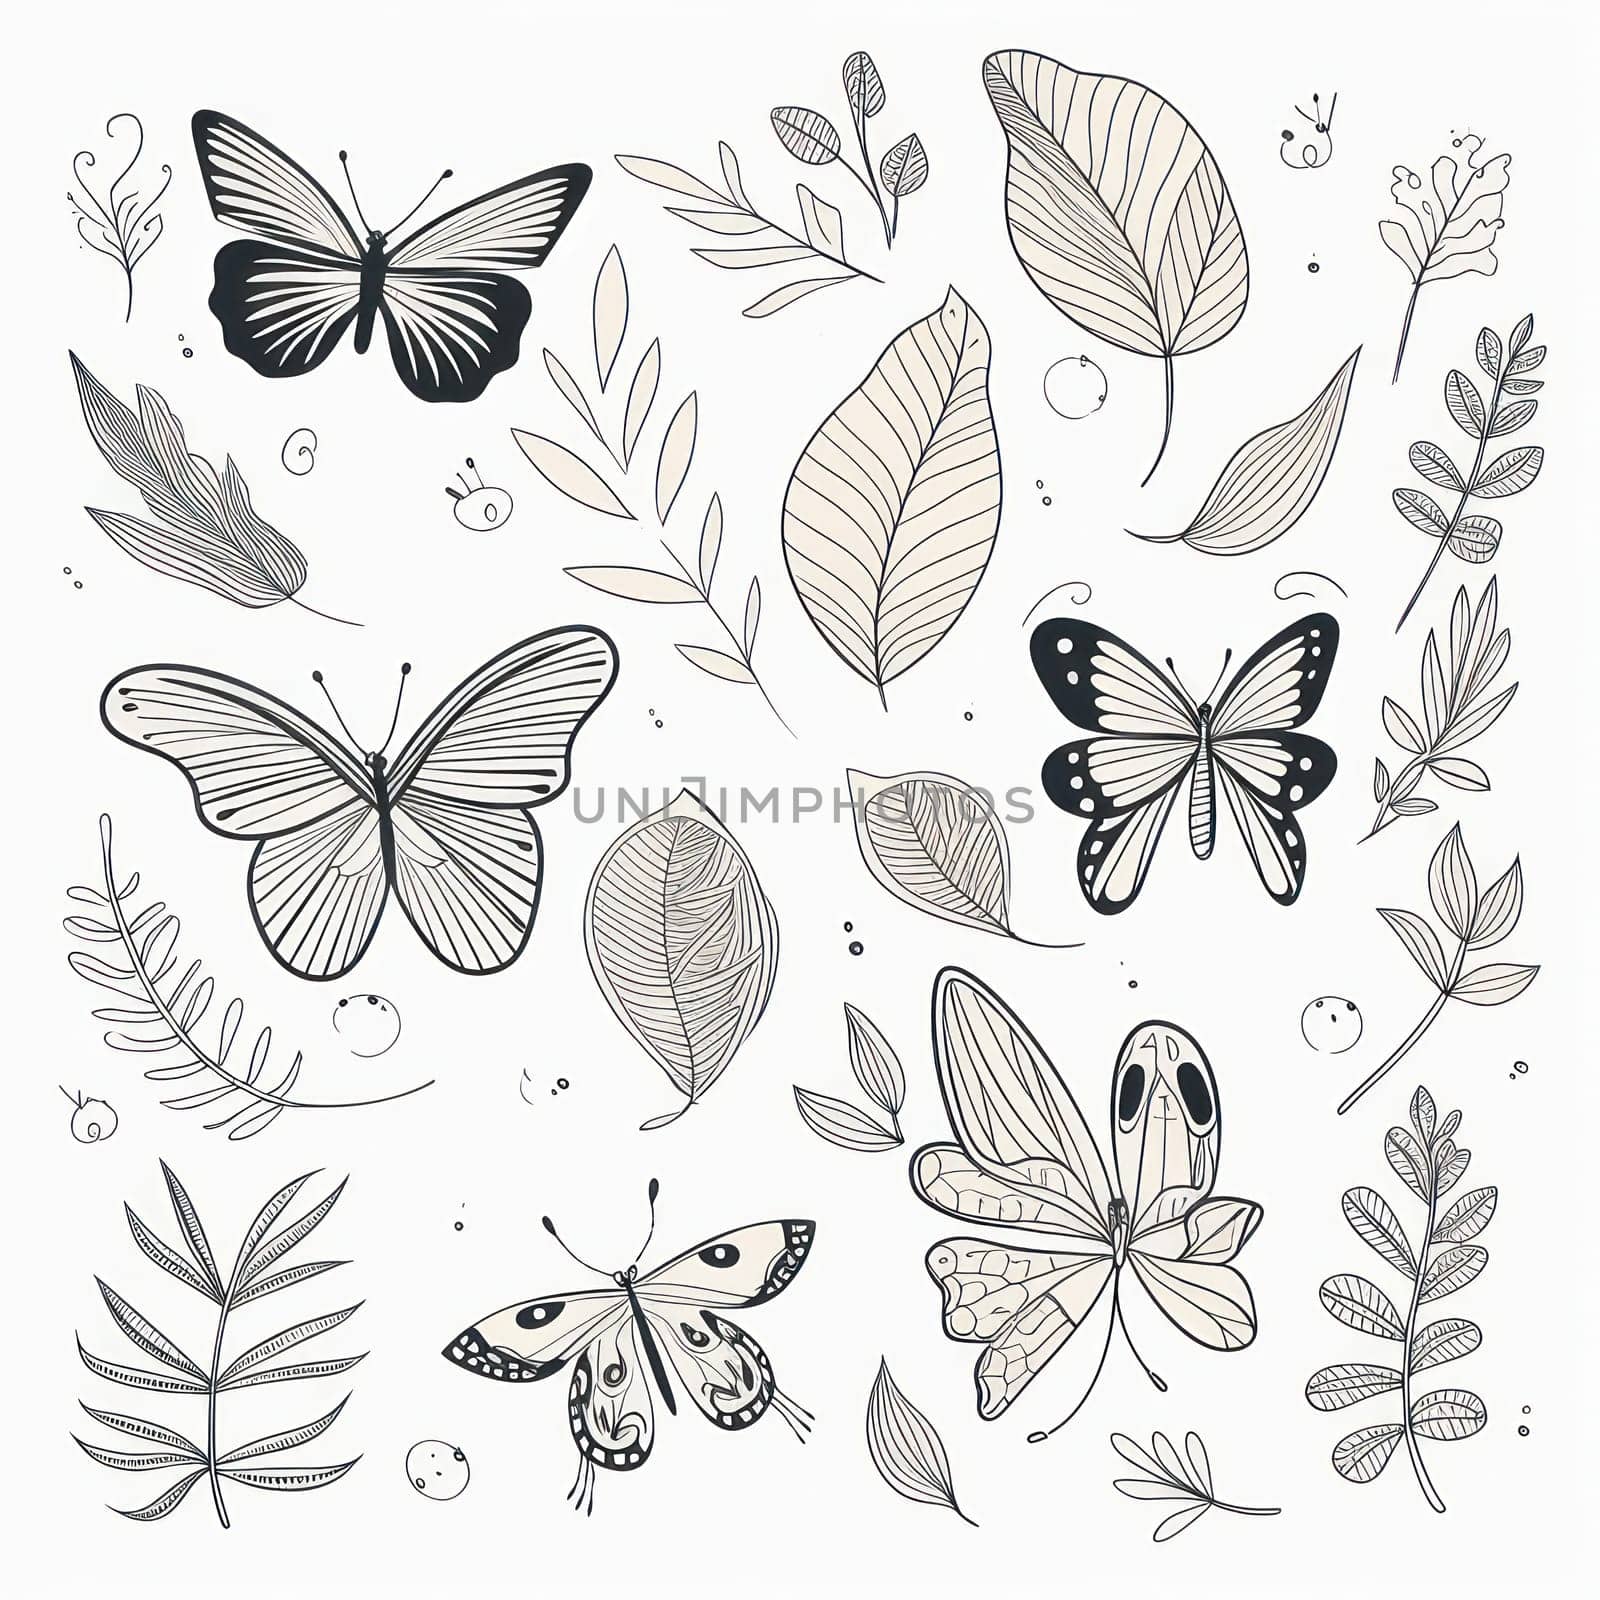 Nature's Delicate Design: A Monochrome Butterfly Illustration in Decorative Doodle Style on a White Background by Vichizh